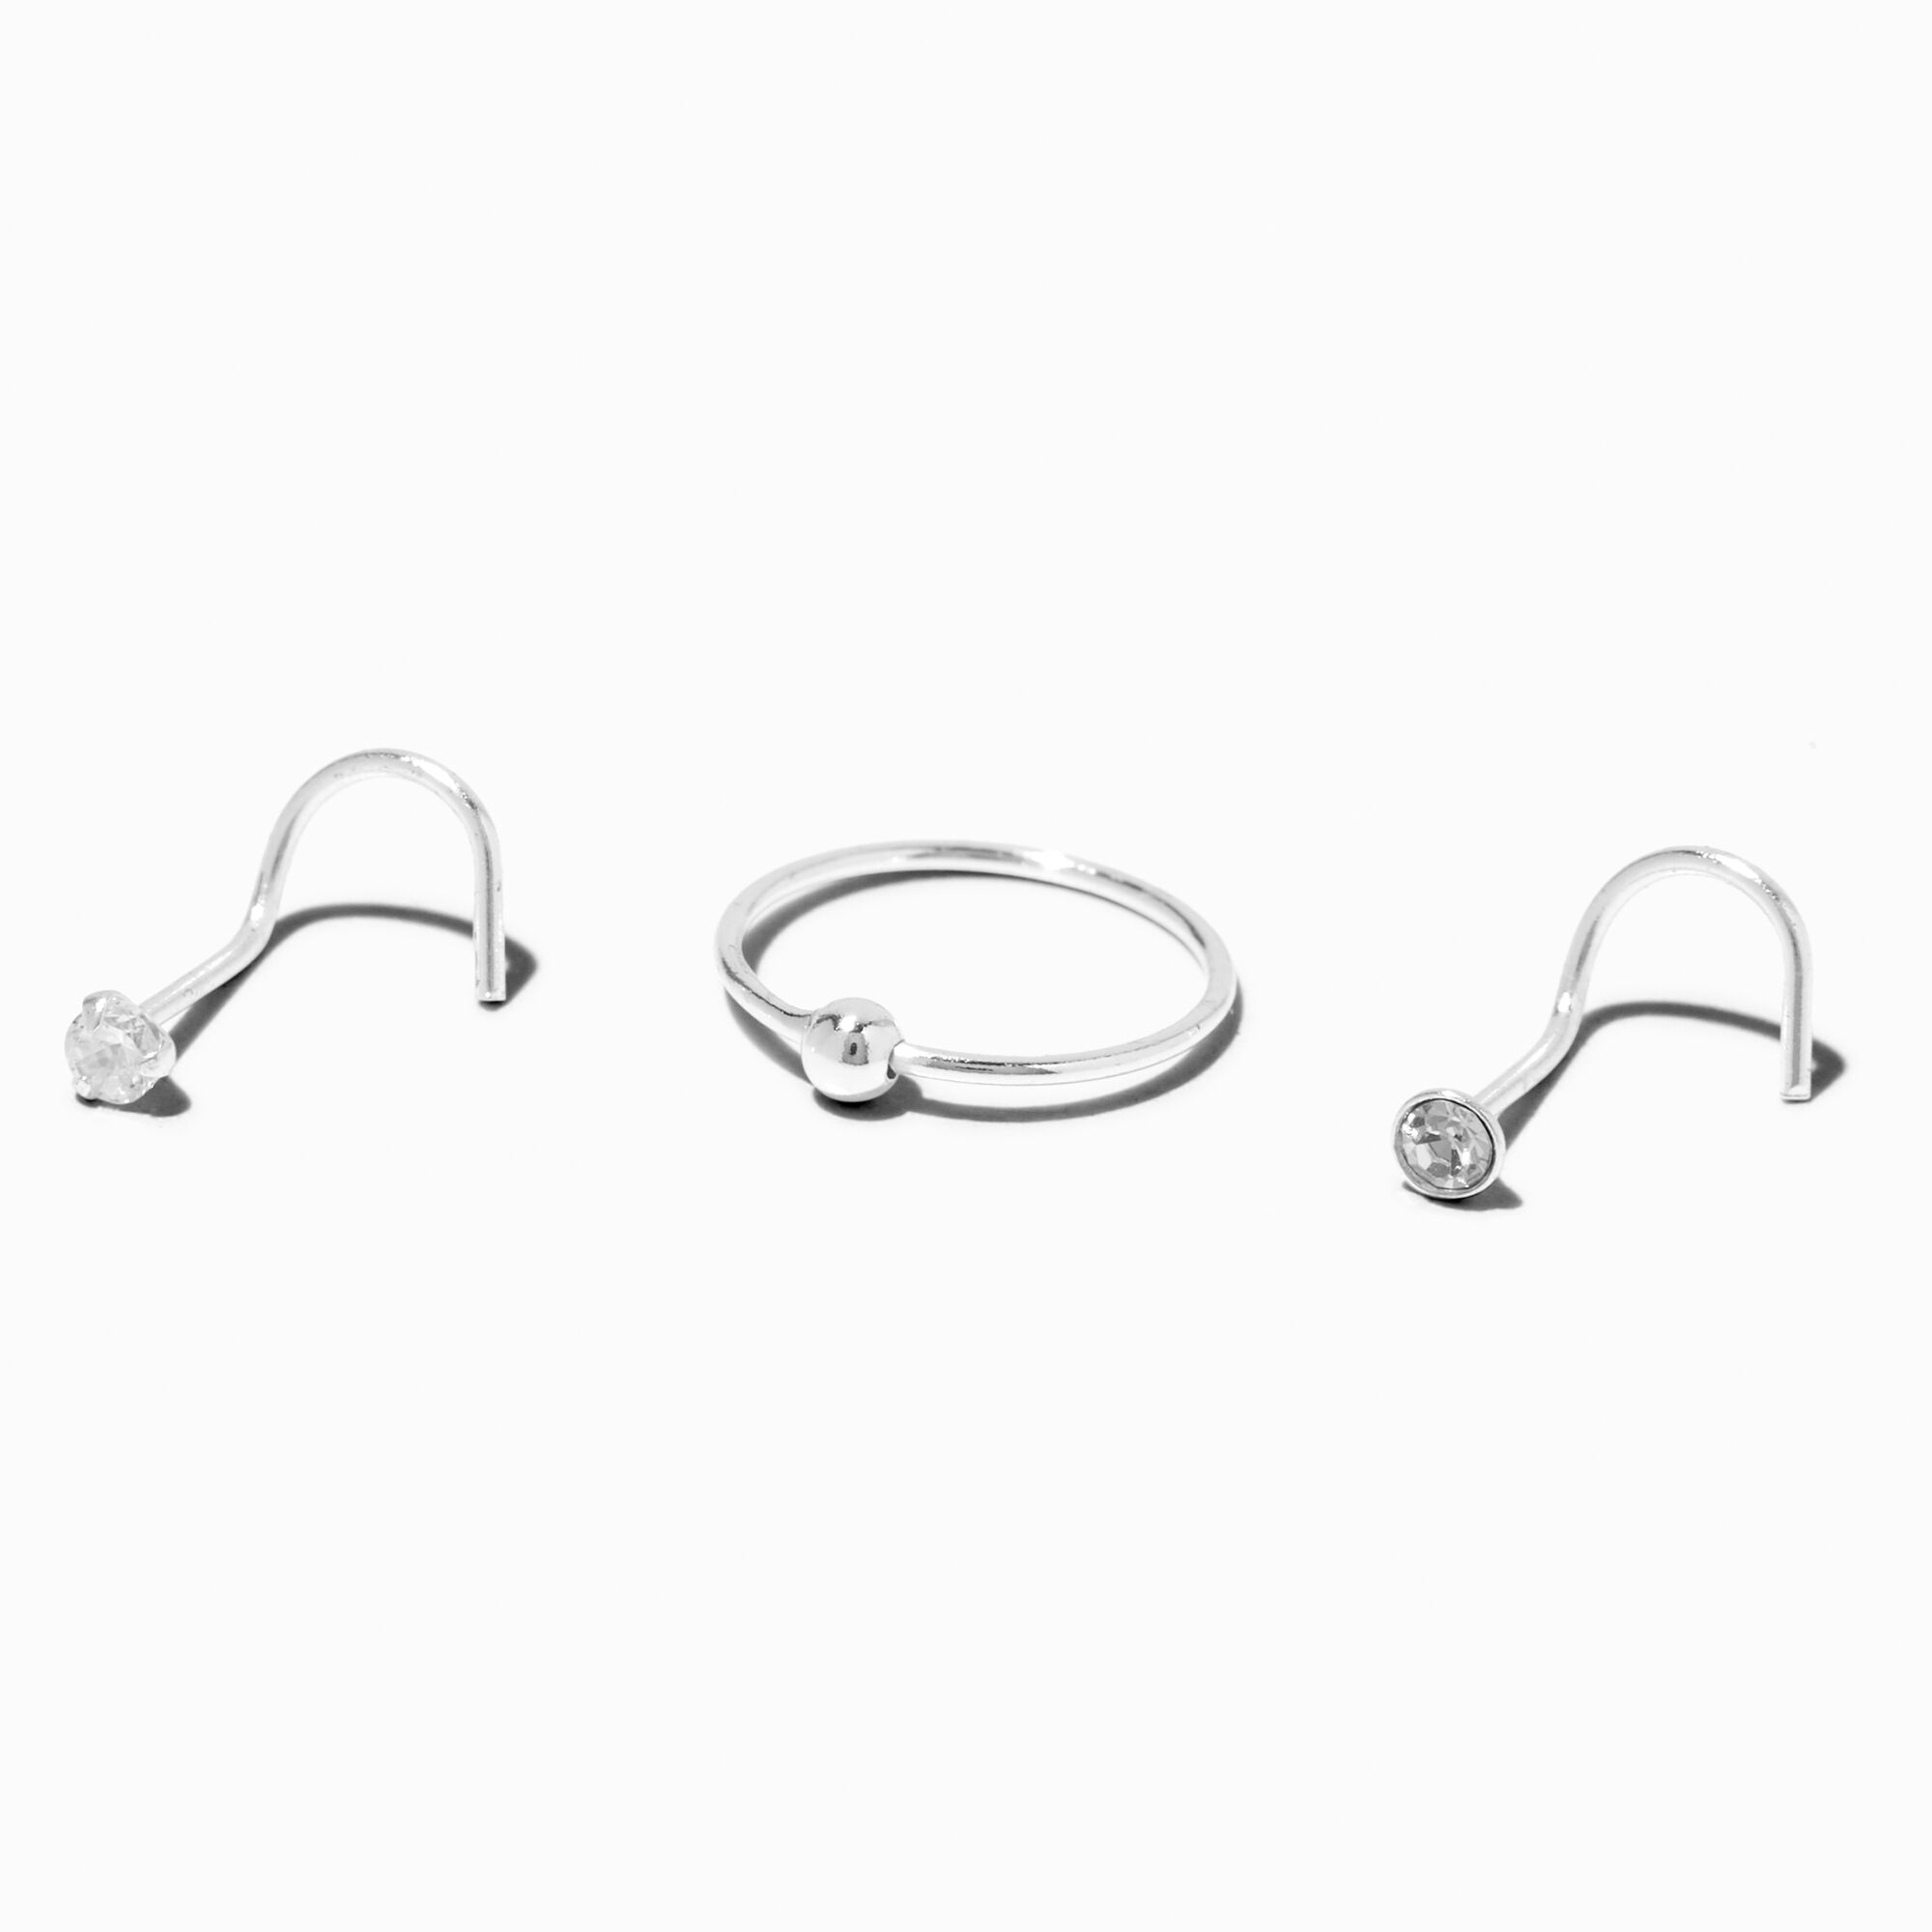 View Claires 22G Ball Crystal Nose Rings 3 Pack Silver information